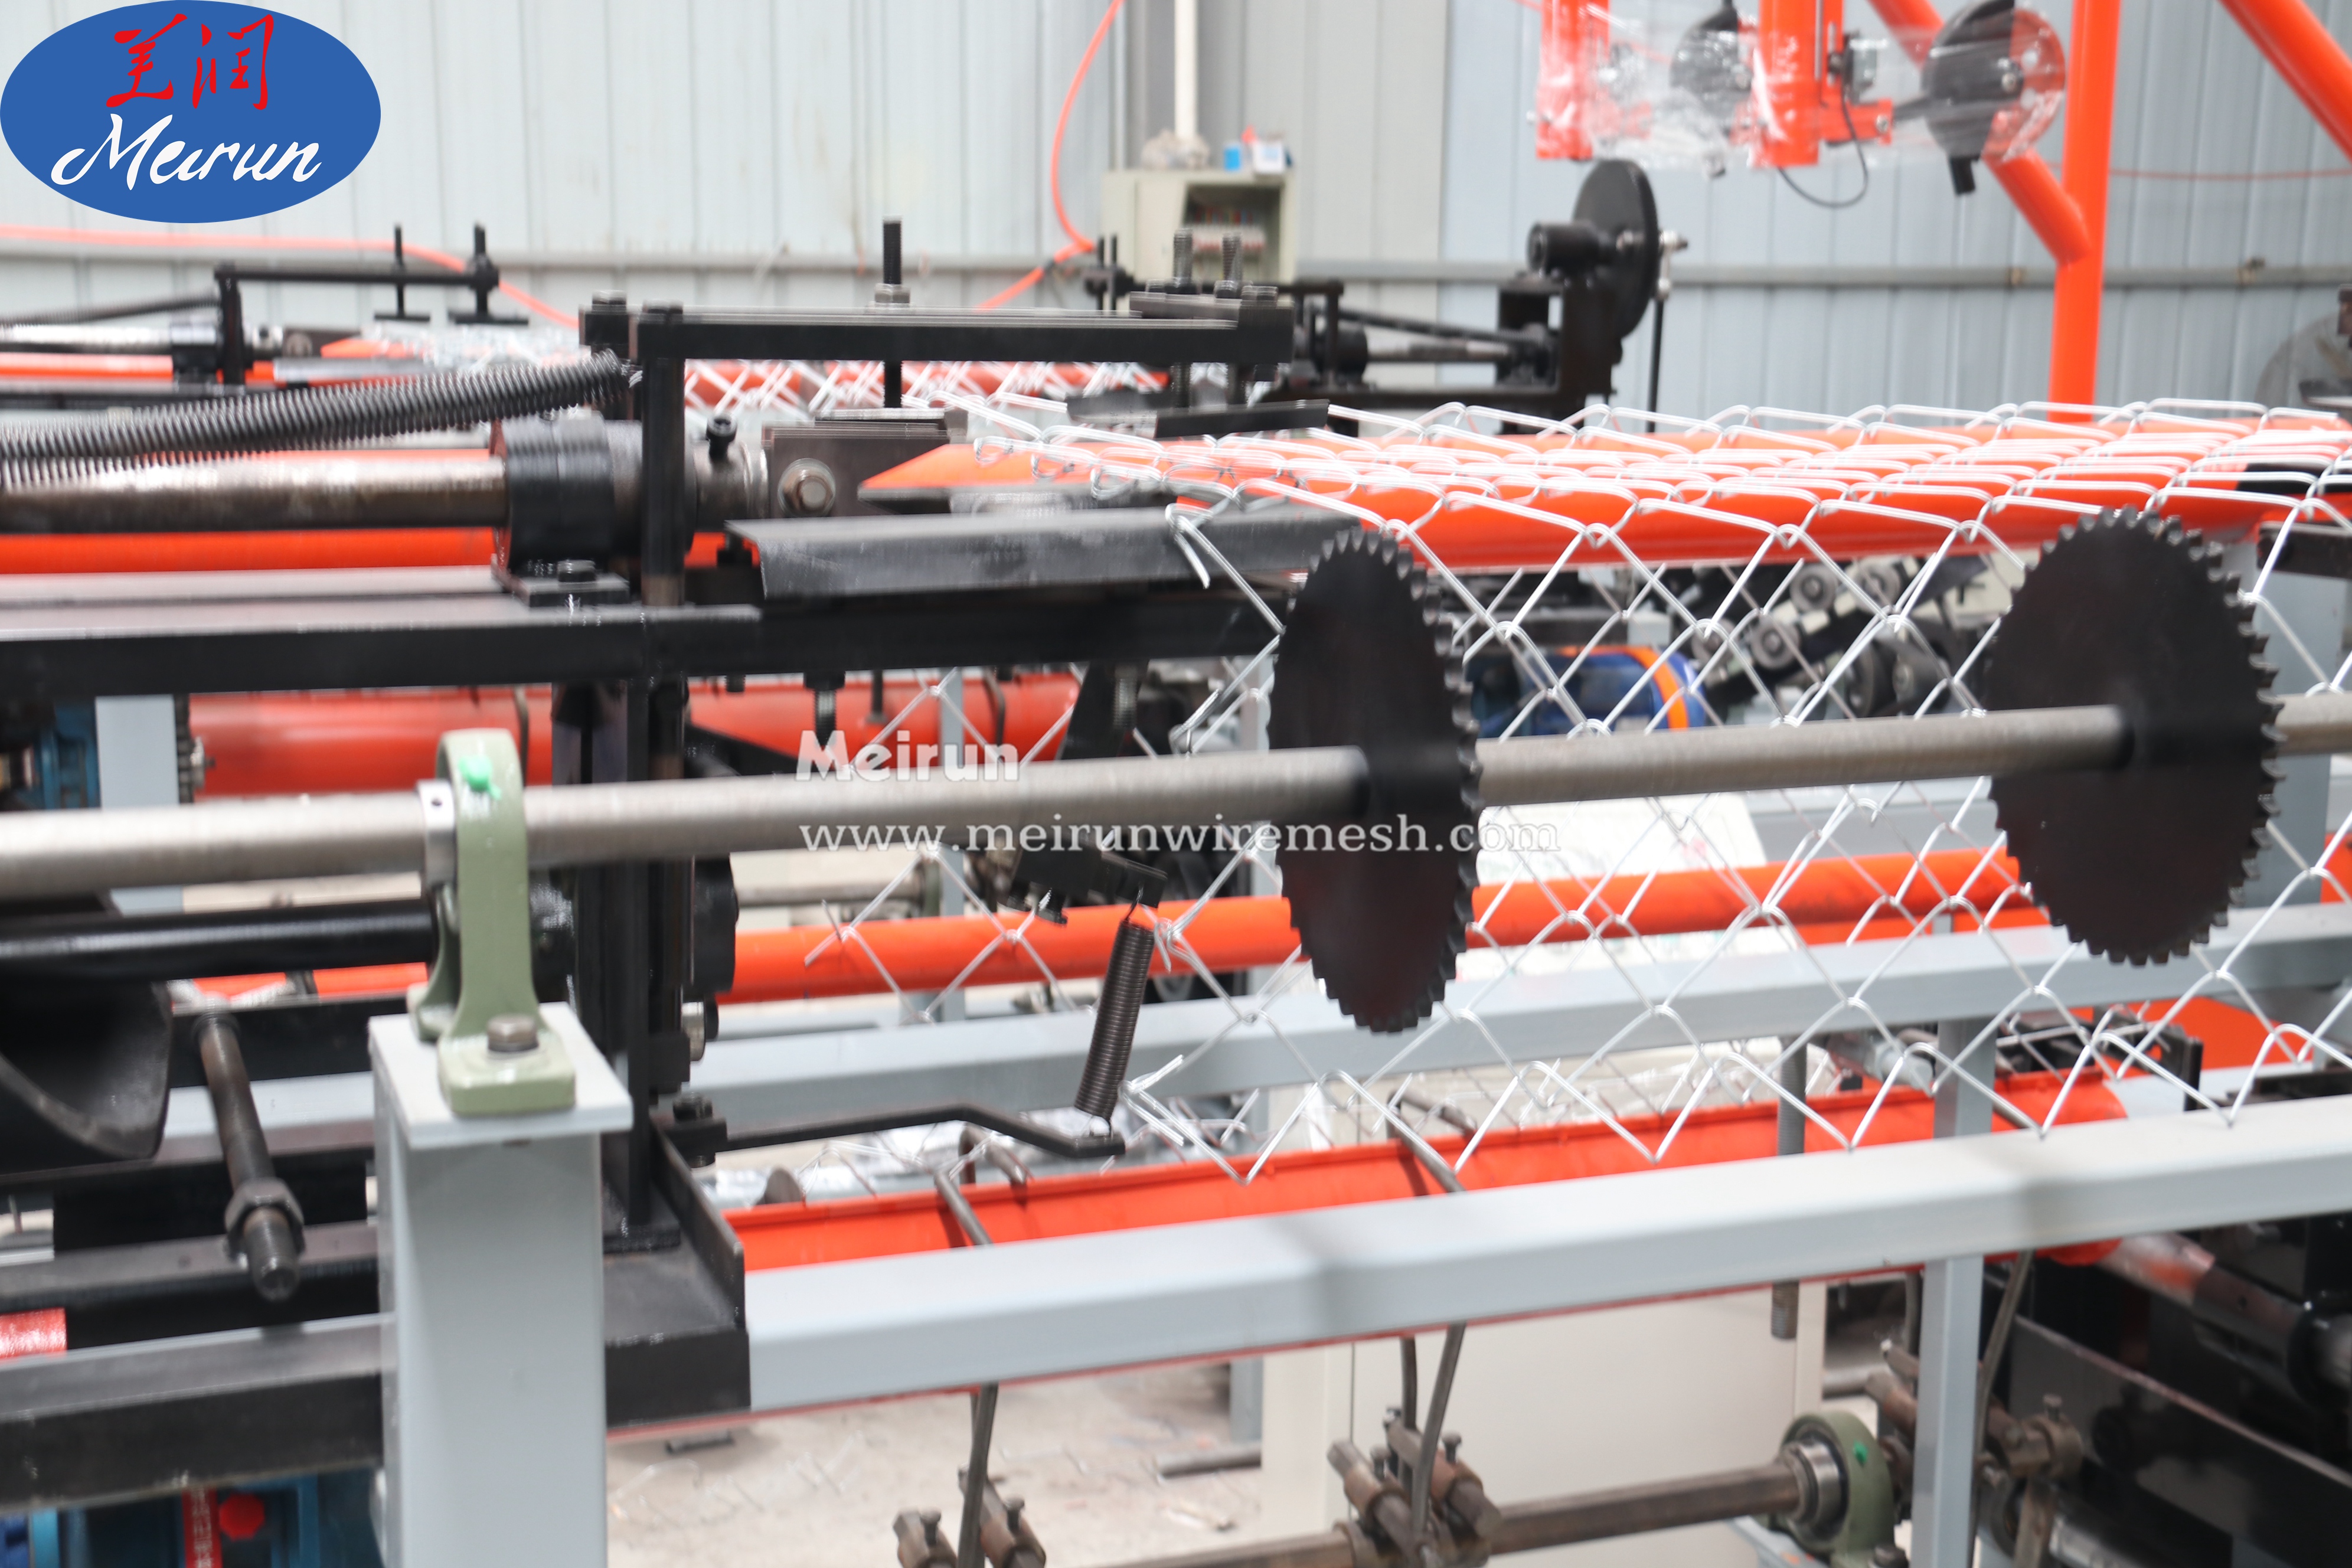 China Automatic Hurricanes Chain Link Fence Machine Supplier